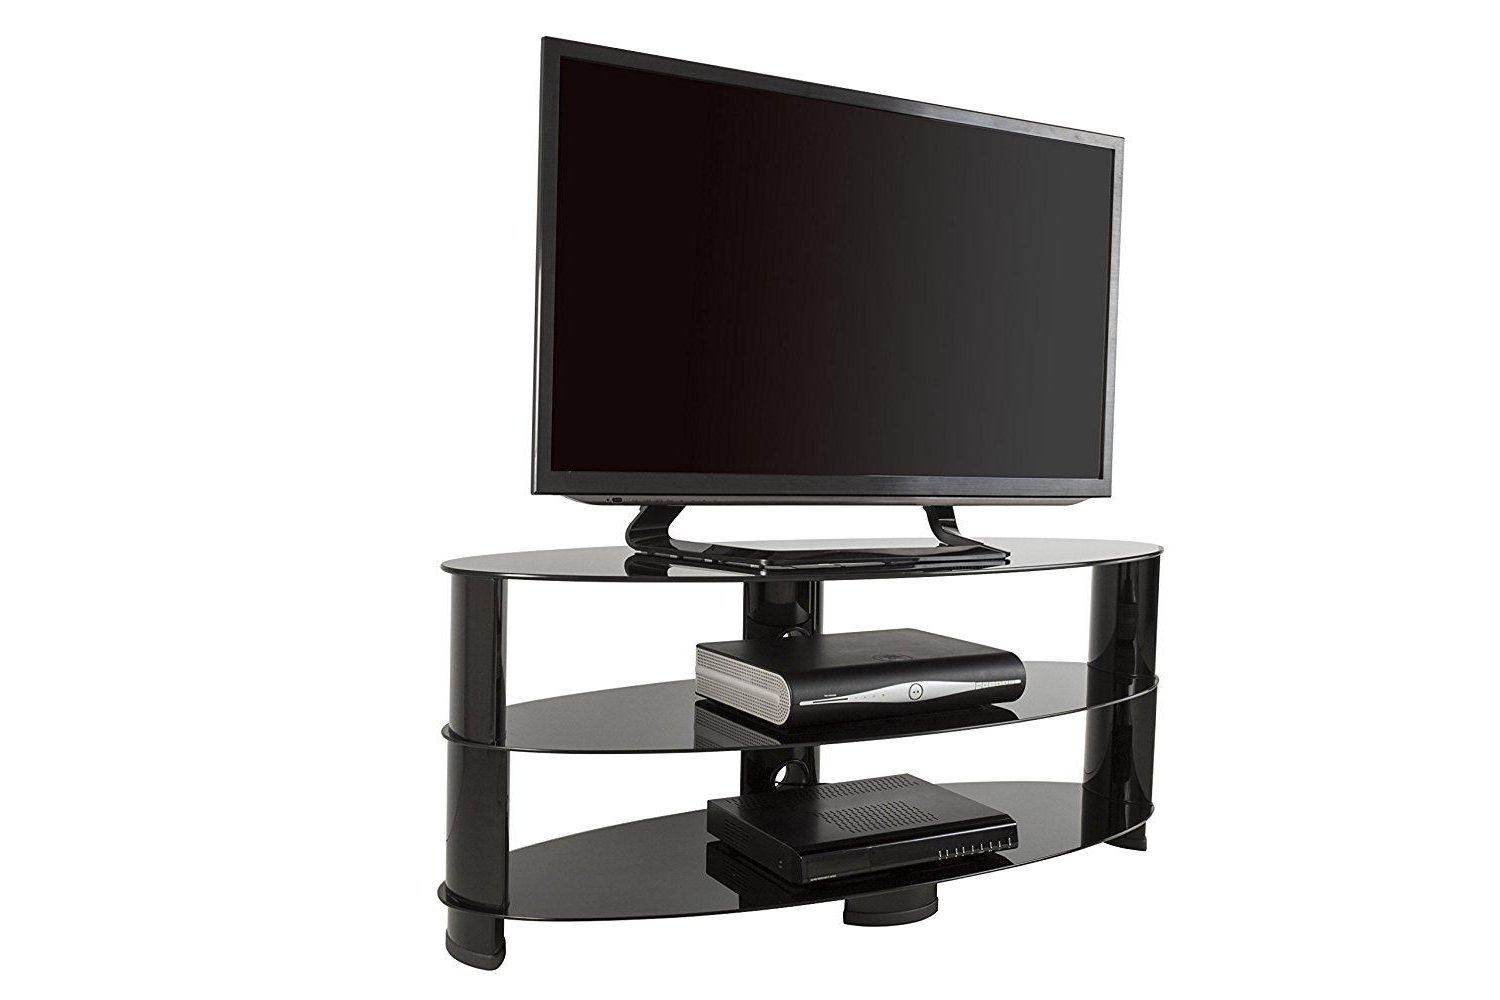 Amazon: Avf Ovl1400bb A Tv Stand With Glass Shelves With Regard To 2017 Glass Shelves Tv Stands For Tvs Up To 60" (View 3 of 10)